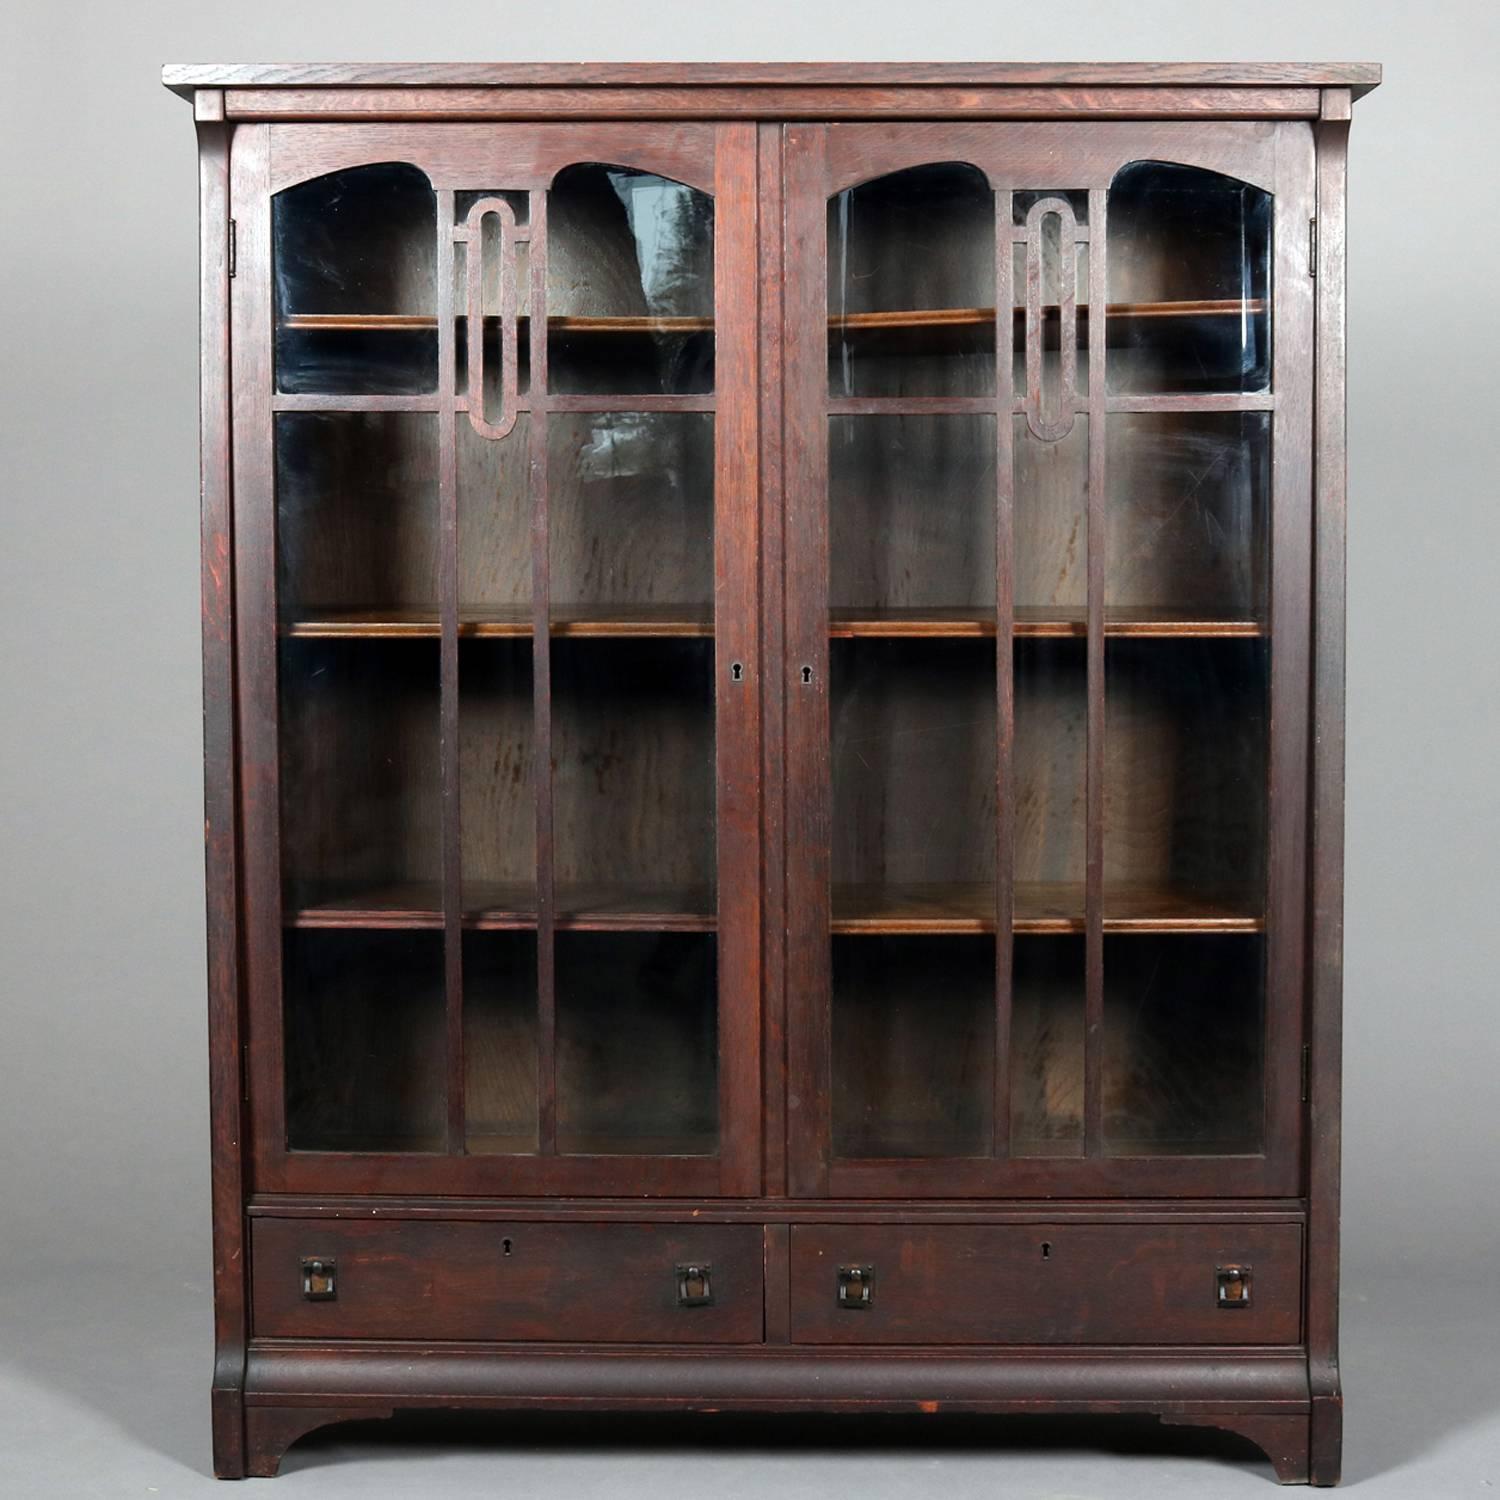 Arts & Crafts Gustav Stickley School mission oak bookcase features simple form with two glass door opening to adjustable shelf interior over two drawers, bronze pulls, circa 1910.

Measures: 56